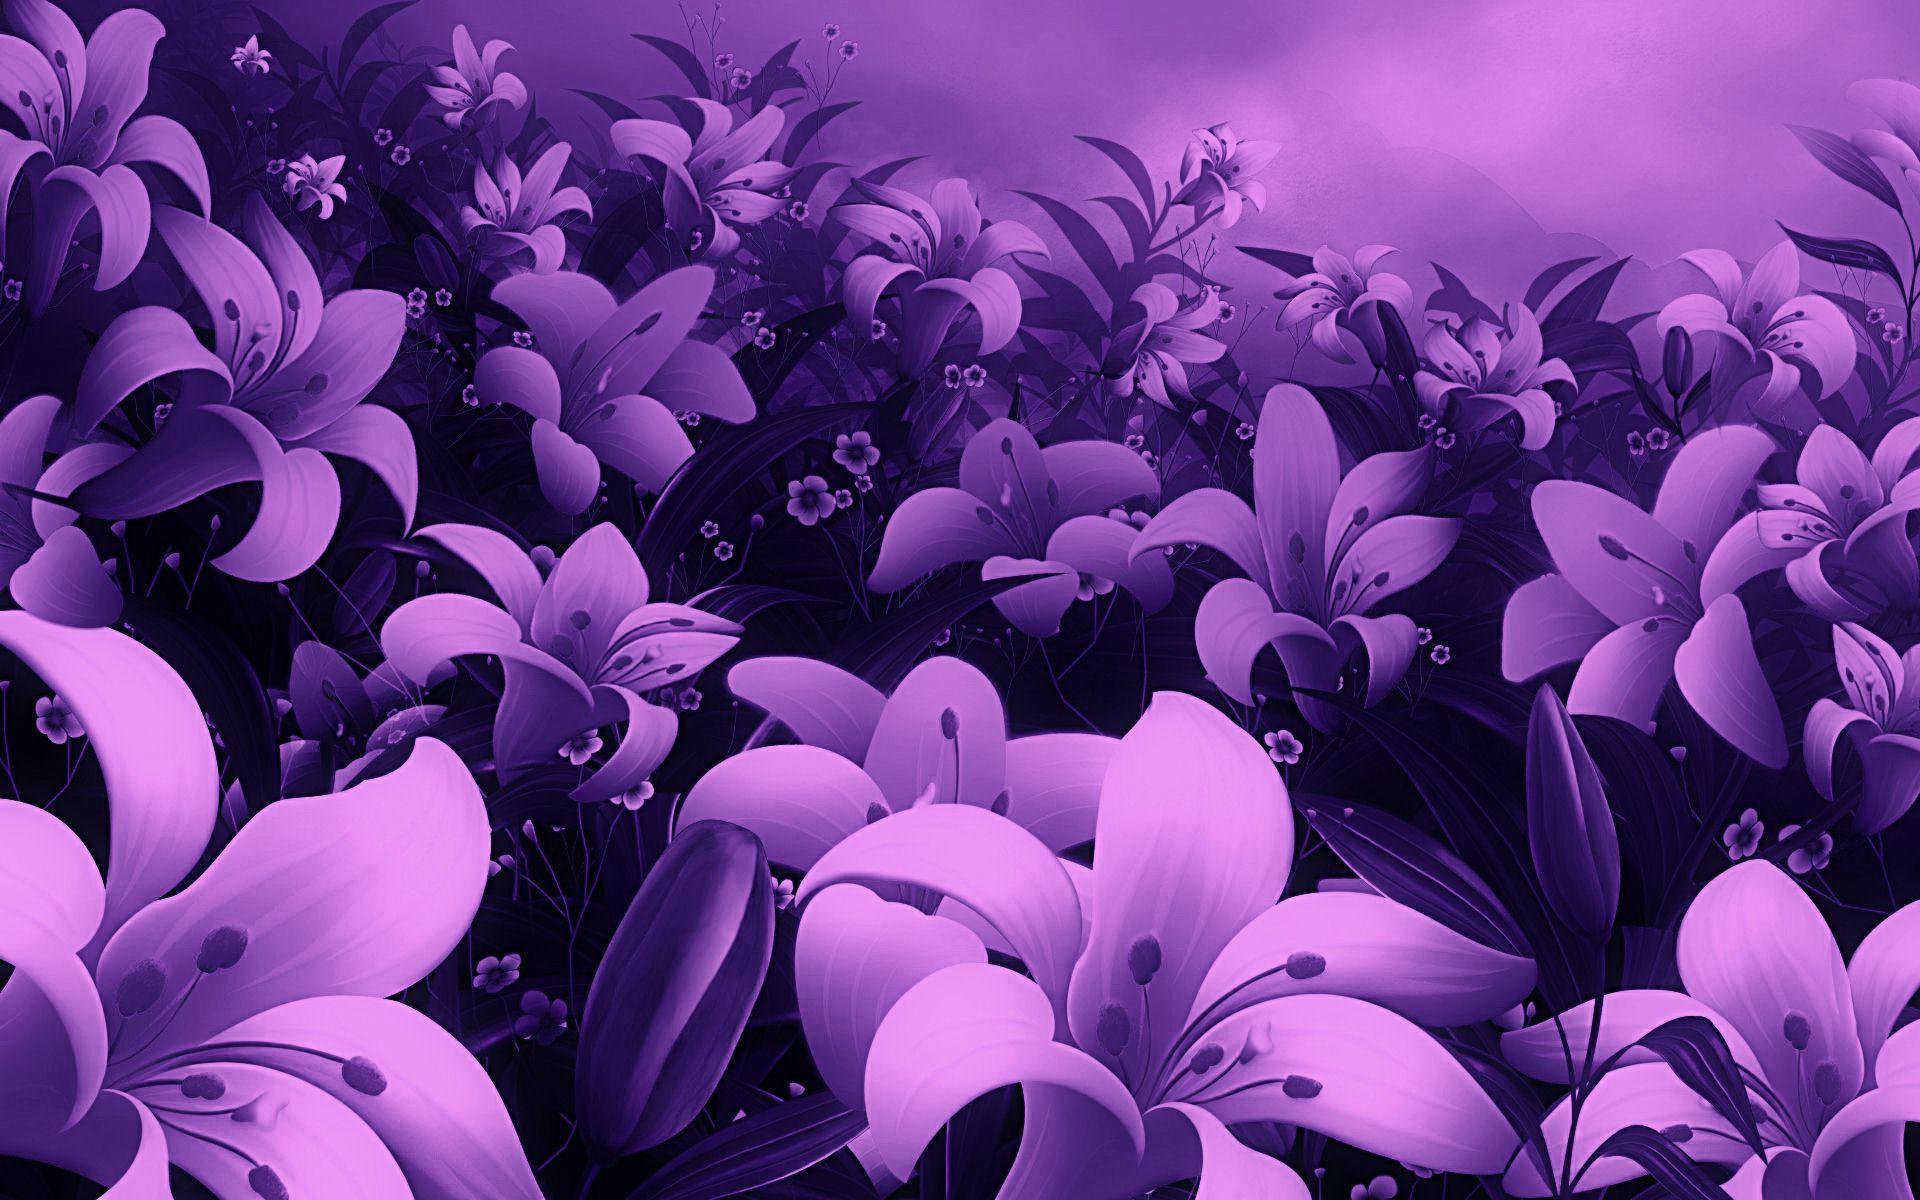 New Flowers Full Screen Hd Photo High Quality Violet Flower